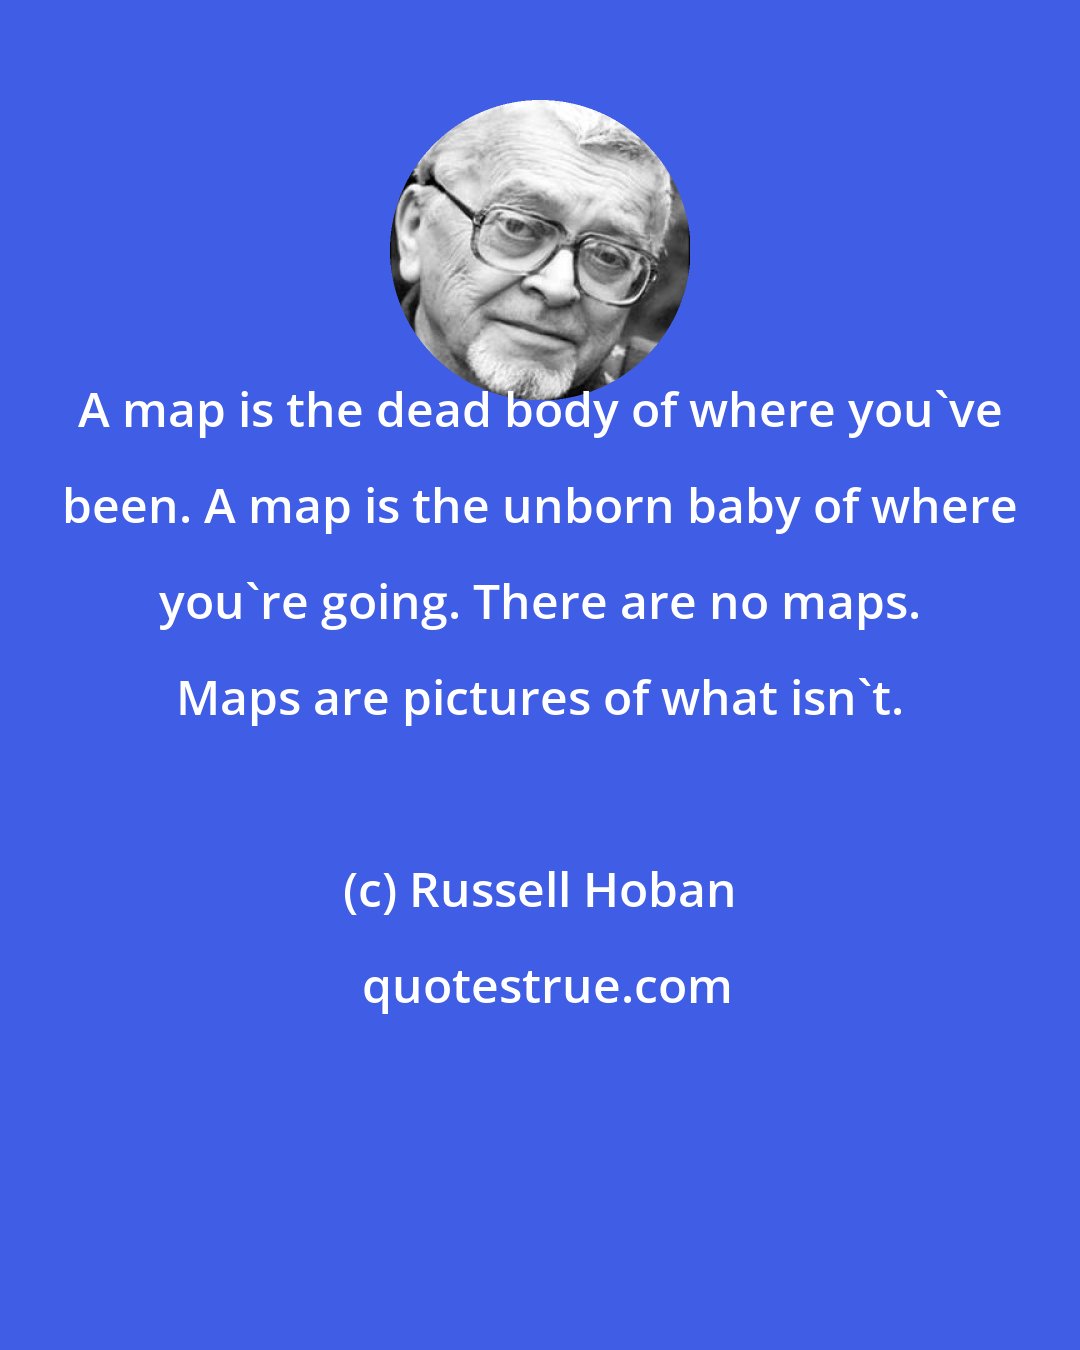 Russell Hoban: A map is the dead body of where you've been. A map is the unborn baby of where you're going. There are no maps. Maps are pictures of what isn't.